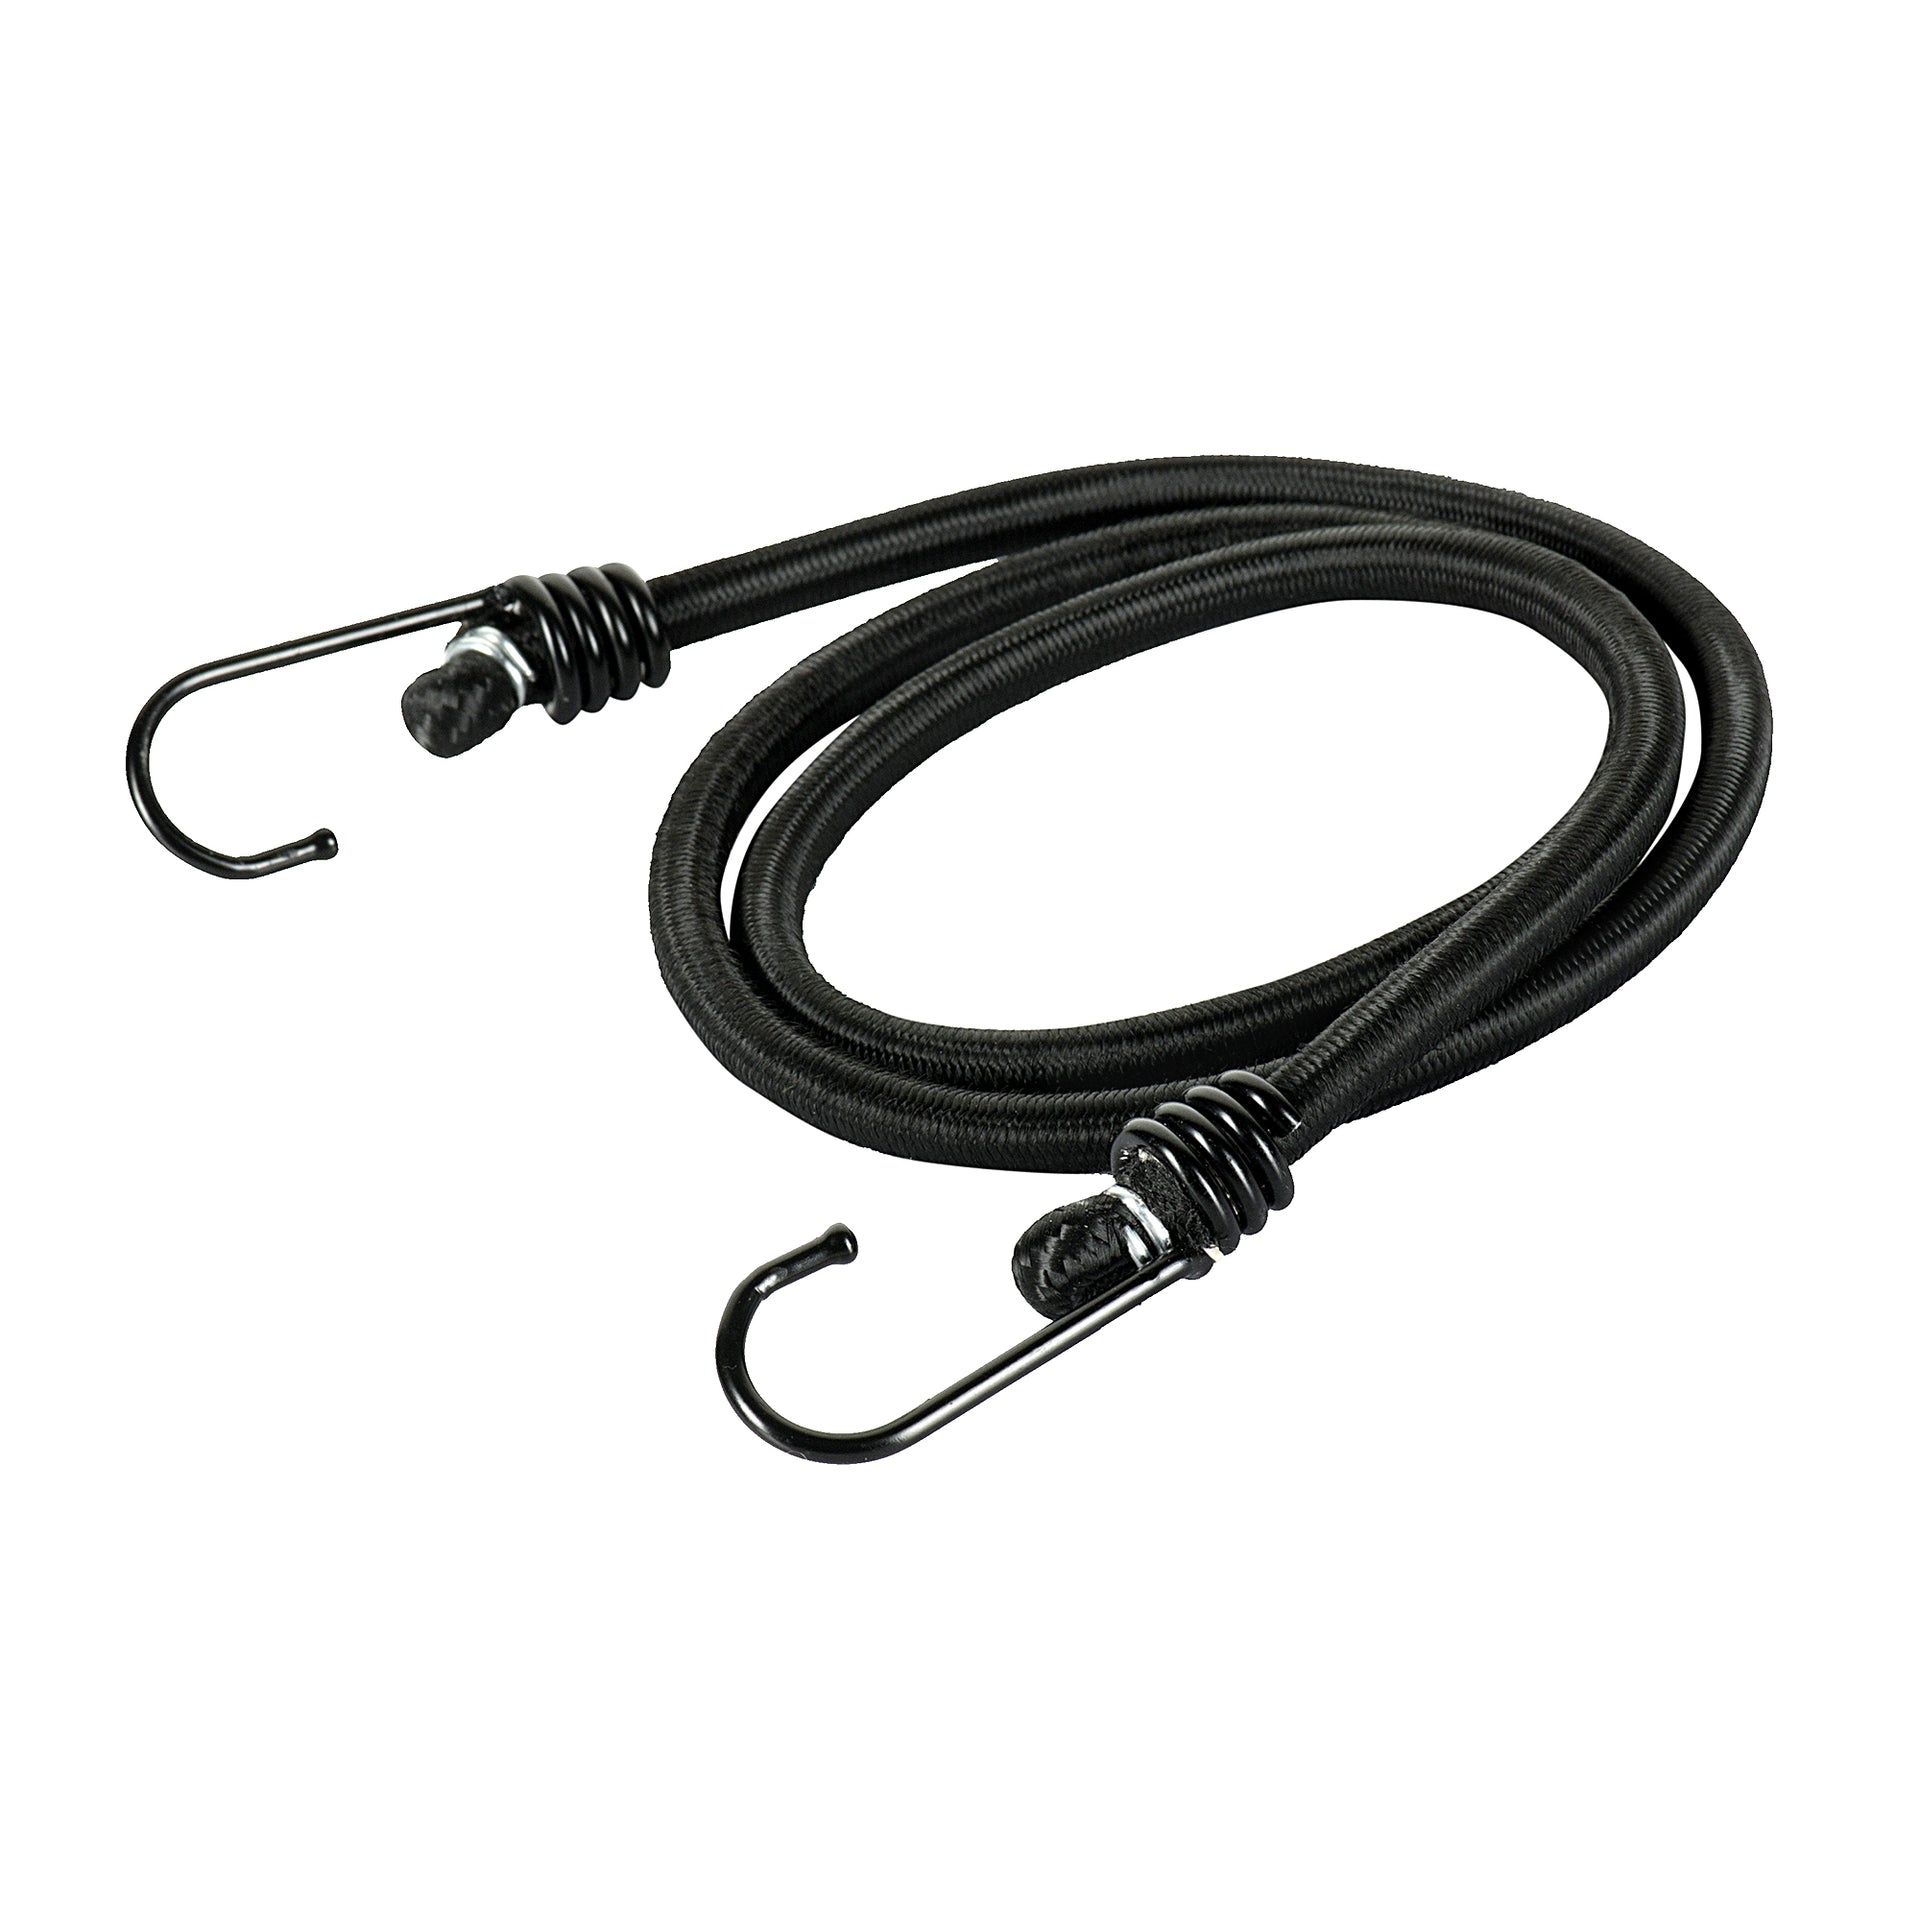 M-Tac 40" Bungee Cord with Metal Hooks (Set of 2)